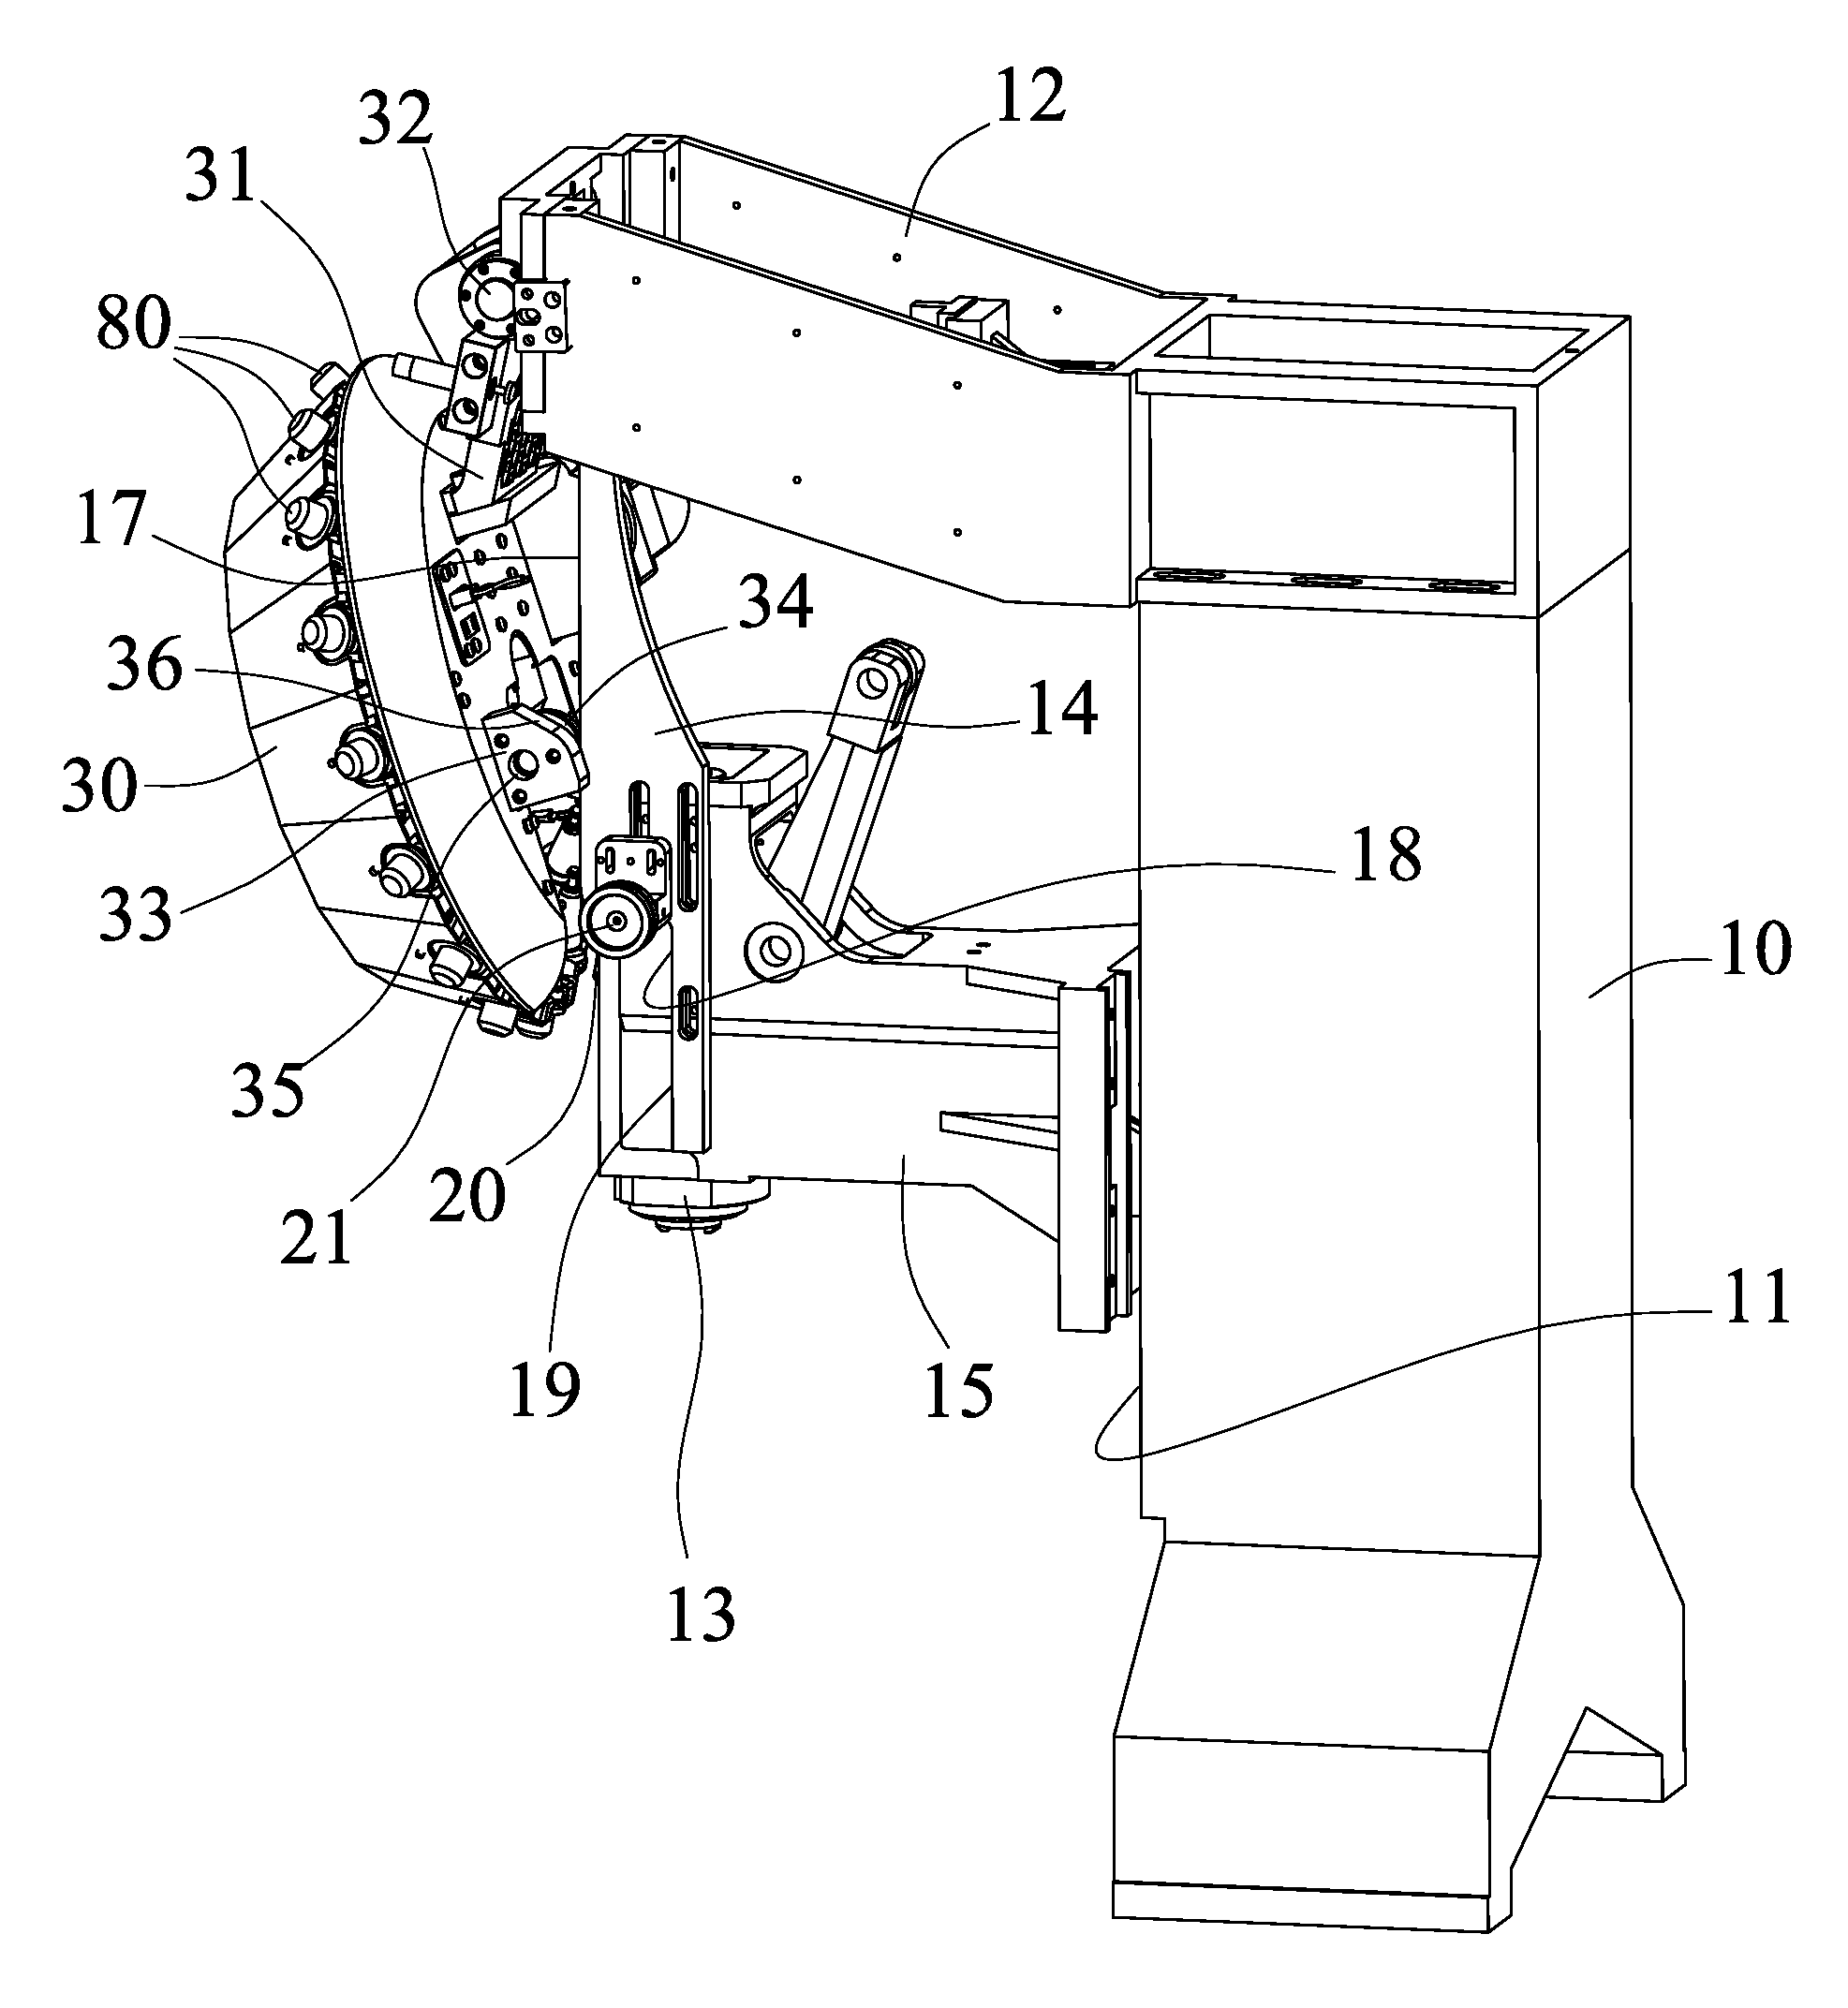 Tool changer for machine tool